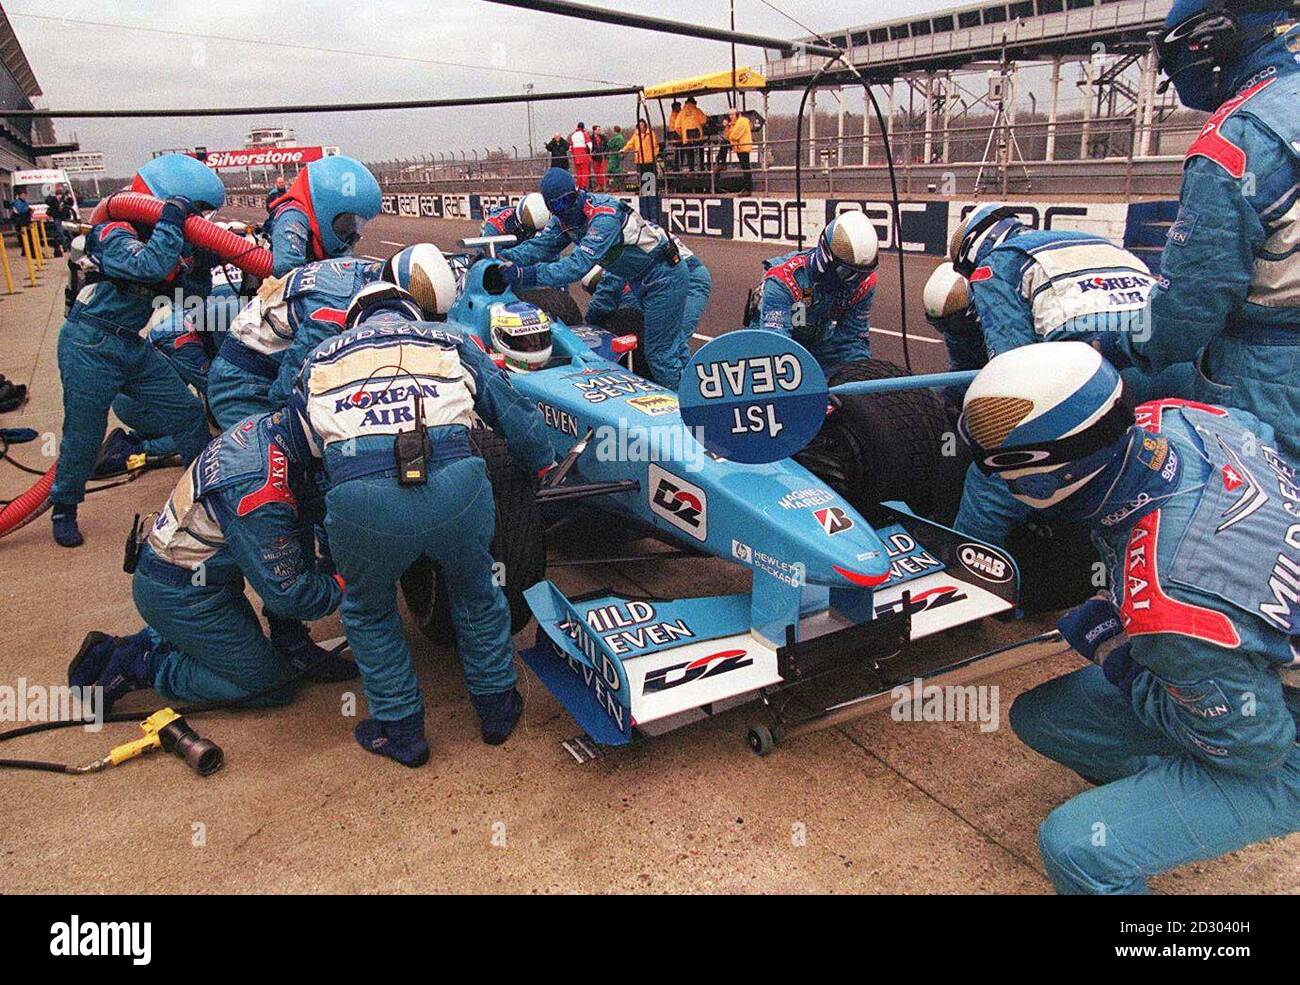 The Benetton Formula 1 team sharpen their pit-work, during testing at Silverstone. Stock Photo